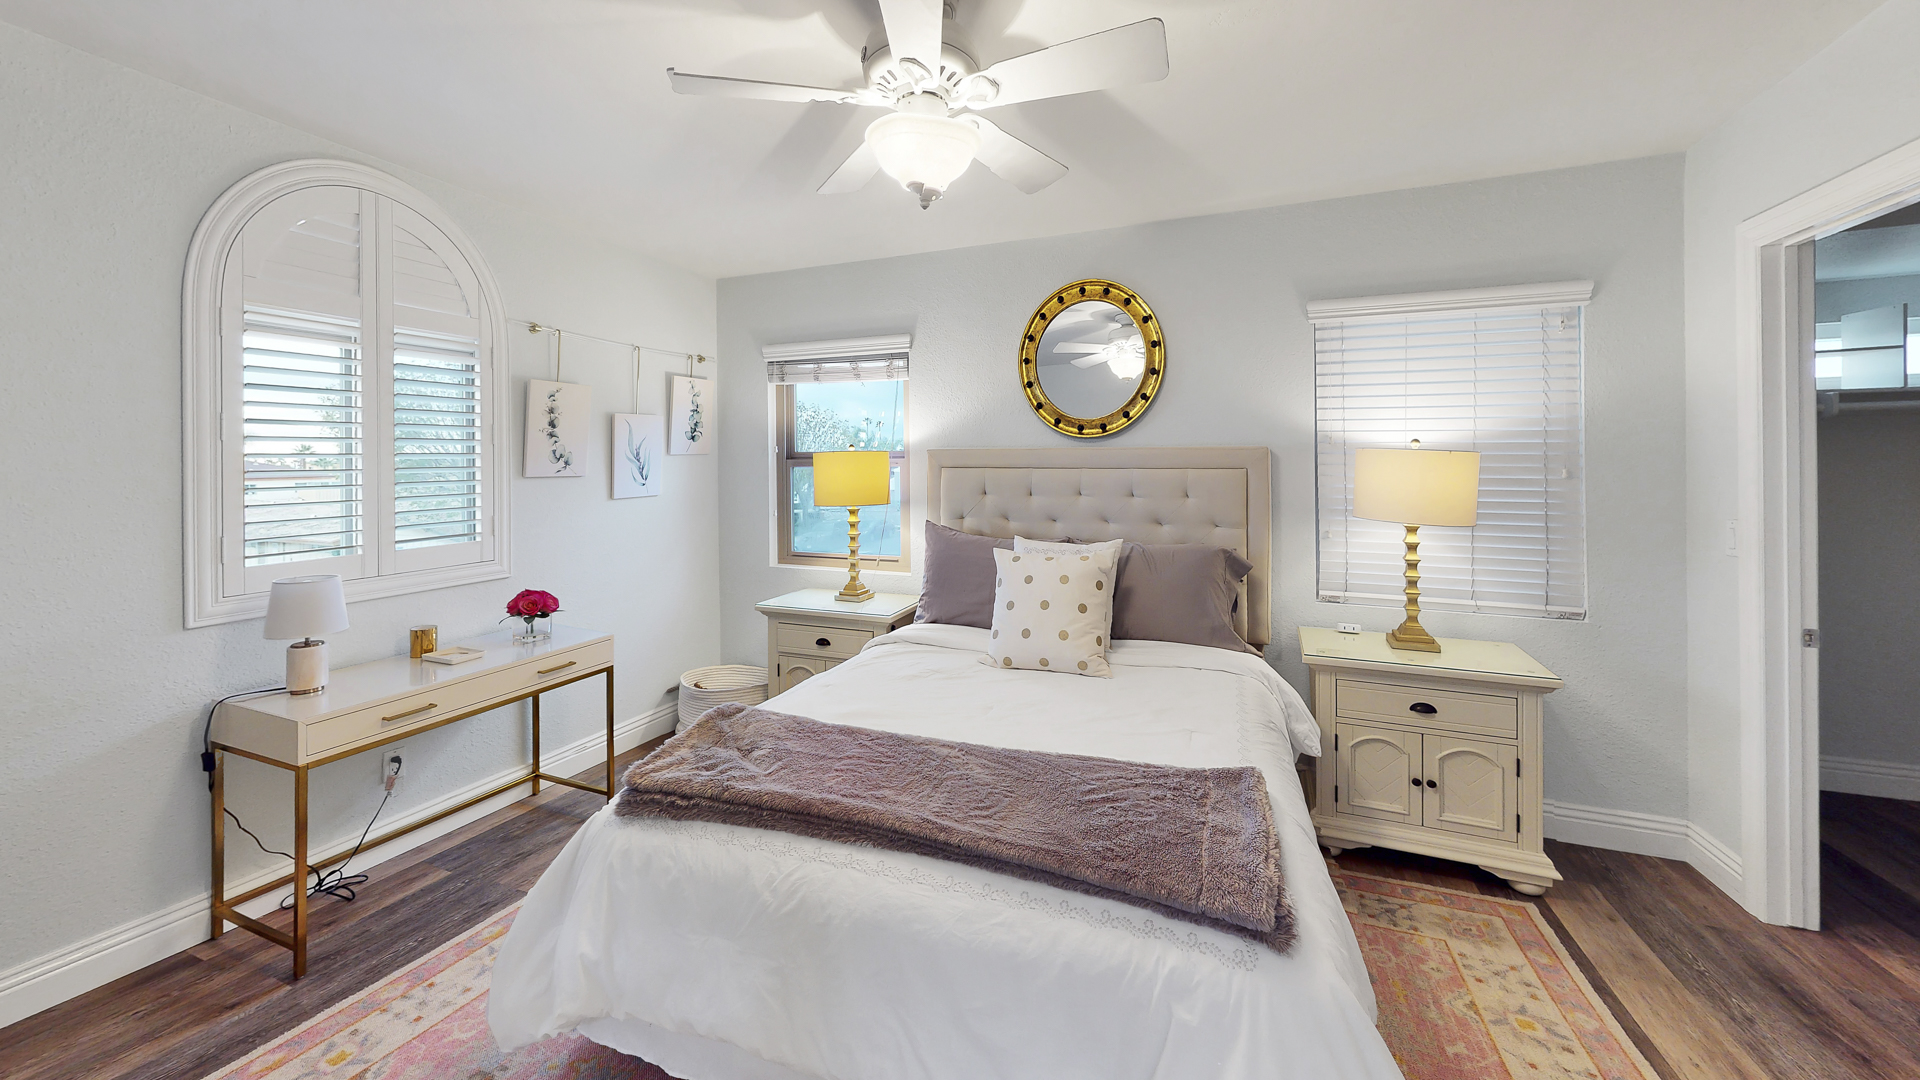 Second master suite has a ceiling fan and even a corner view of the beach on a clear day!